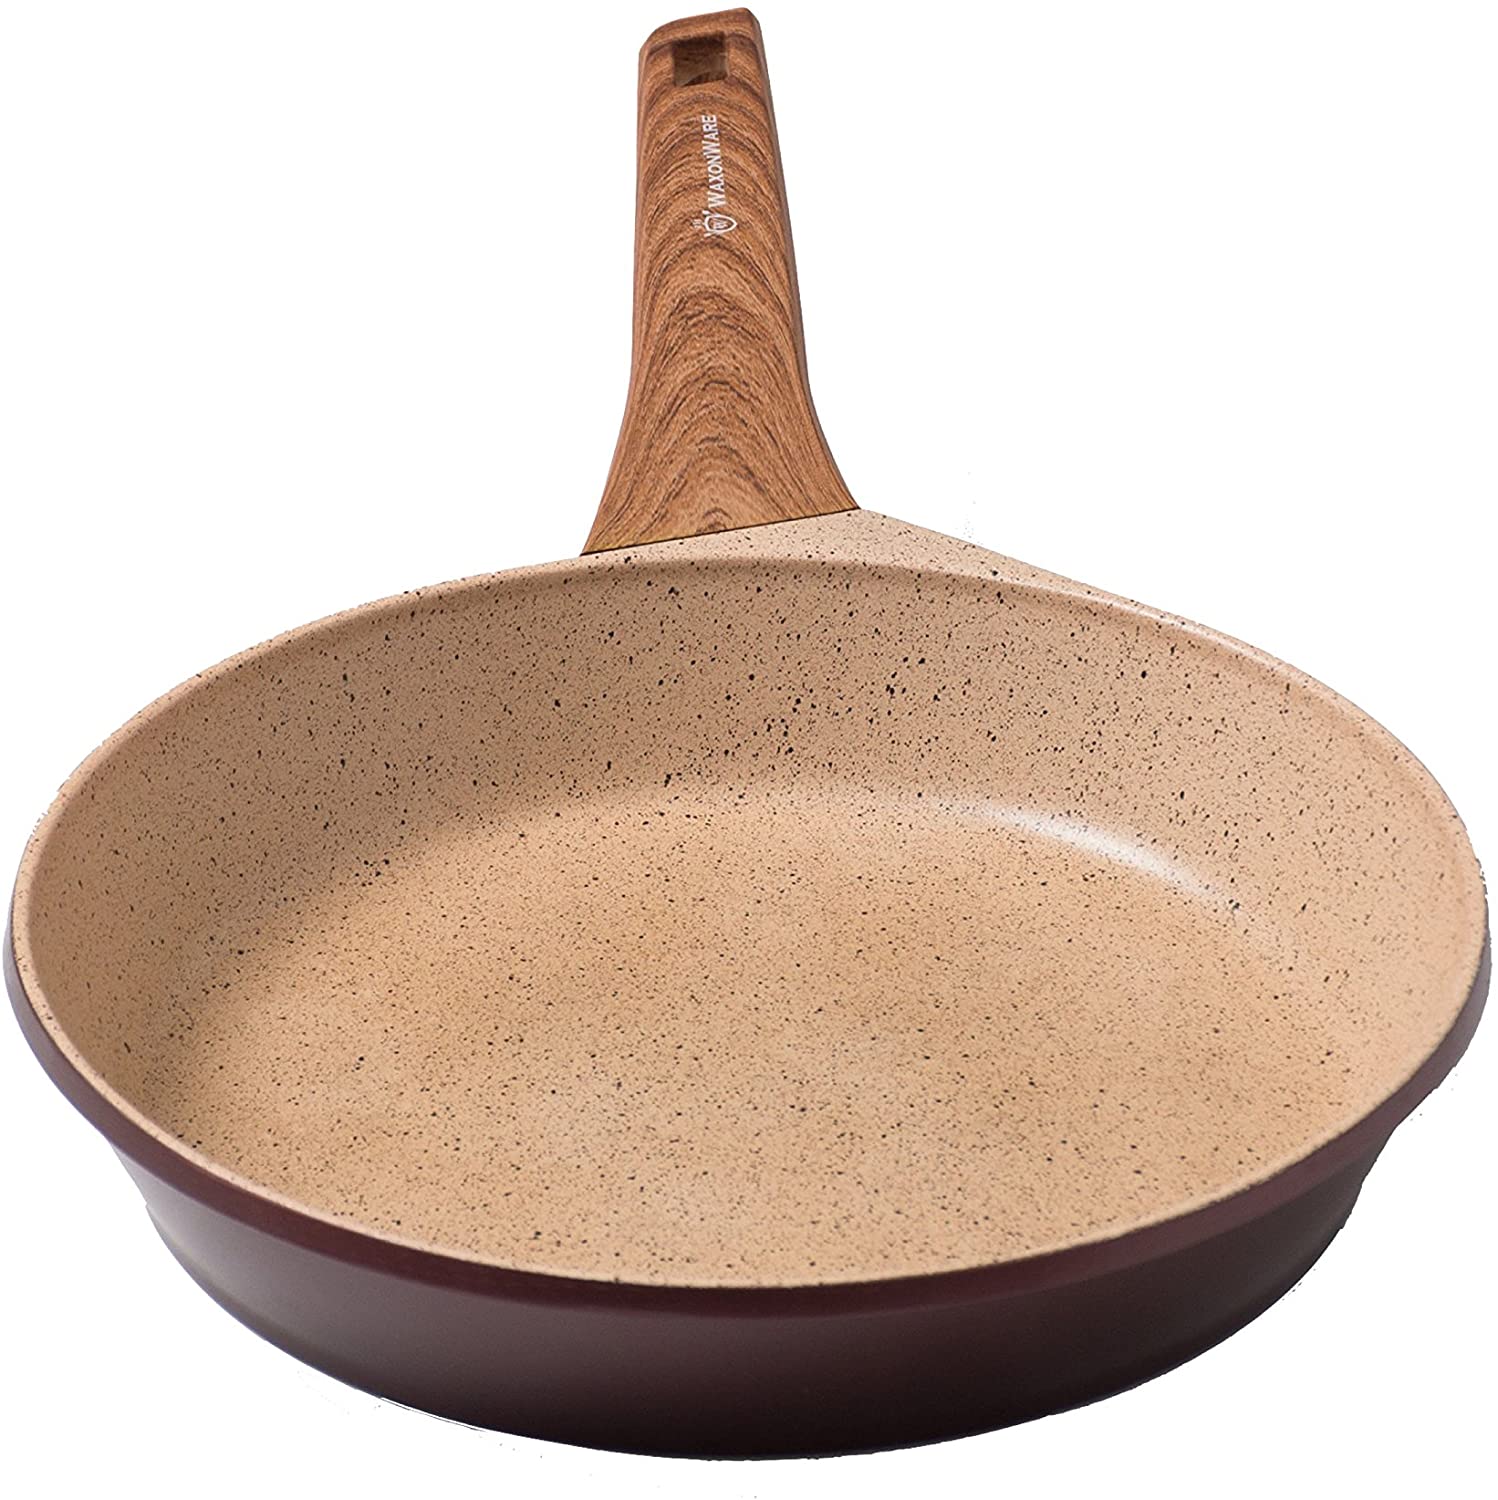 WaxonWare MARBELLOUS Marble Based Crepe Pan With Spreader, 11-Inch